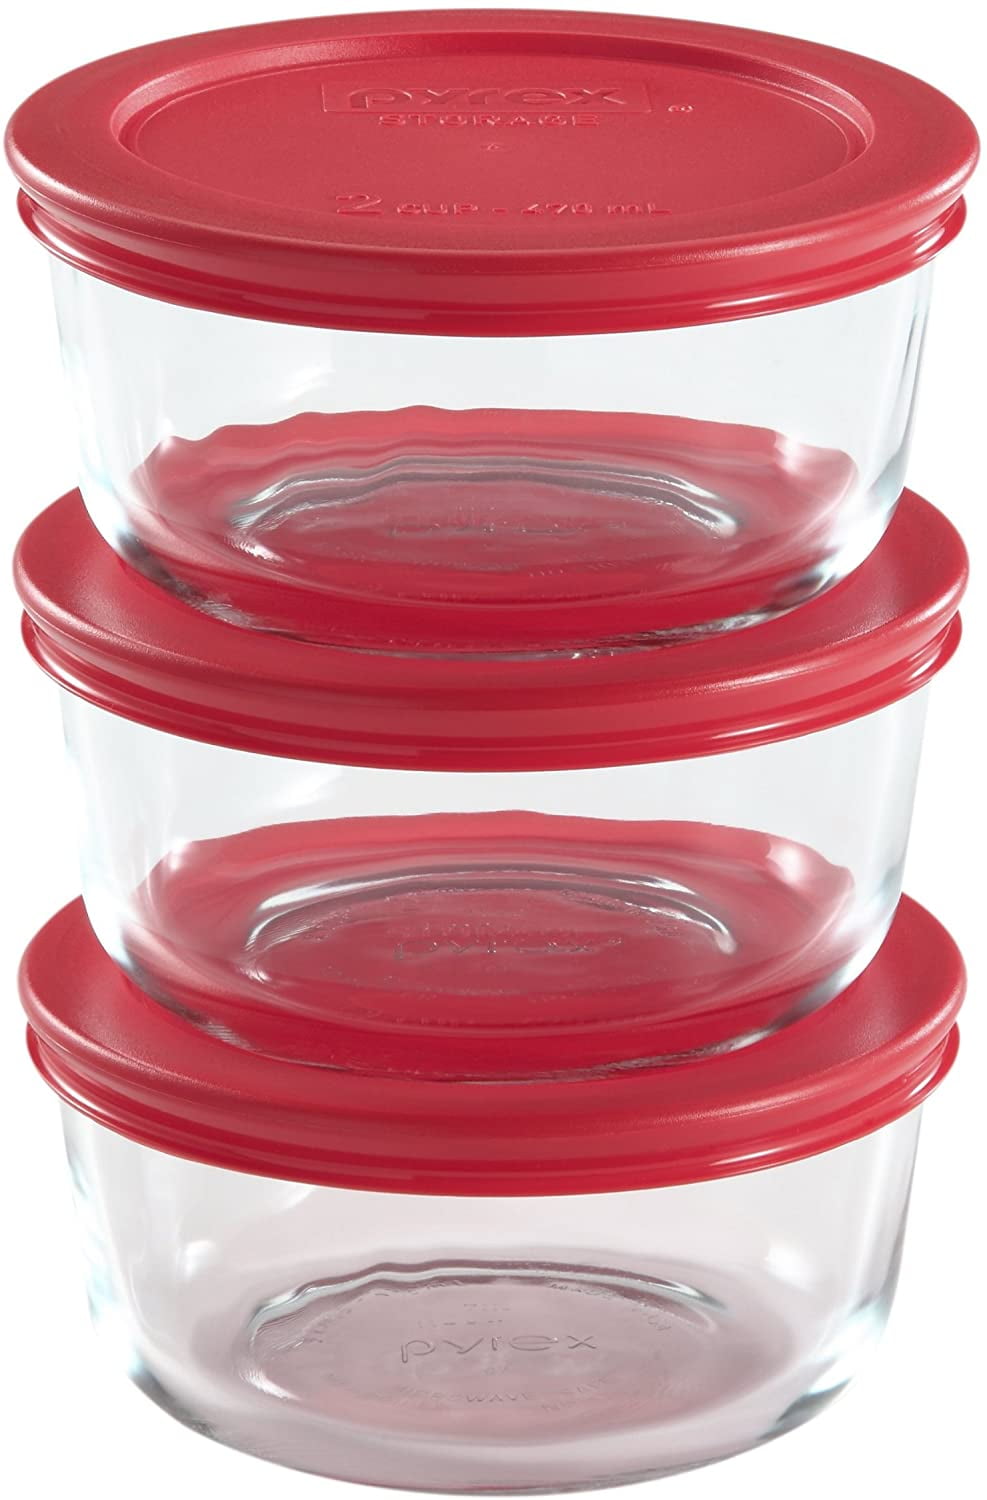 Pyrex Simply Store 7200 Glass Storage Bowl w/ 7200-PC Red Lid Cover